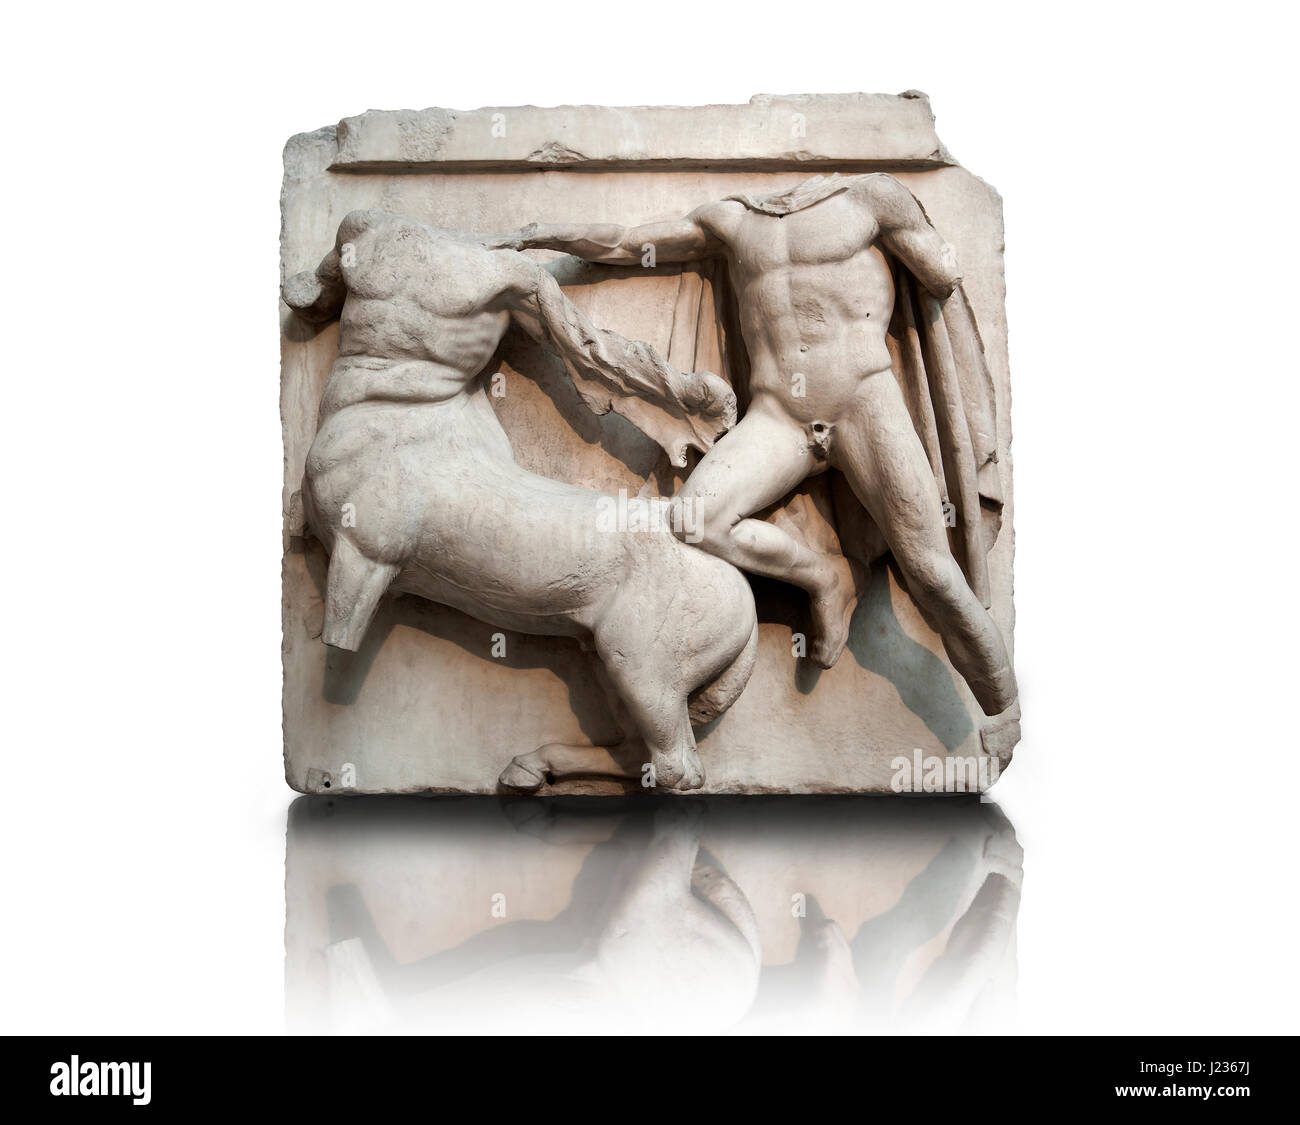 Sculpture of Lapiths and  Centaurs battling from the Metope of the Parthenon on the Acropolis of Athens No III. Also known as the Elgin marbles. Briti Stock Photo